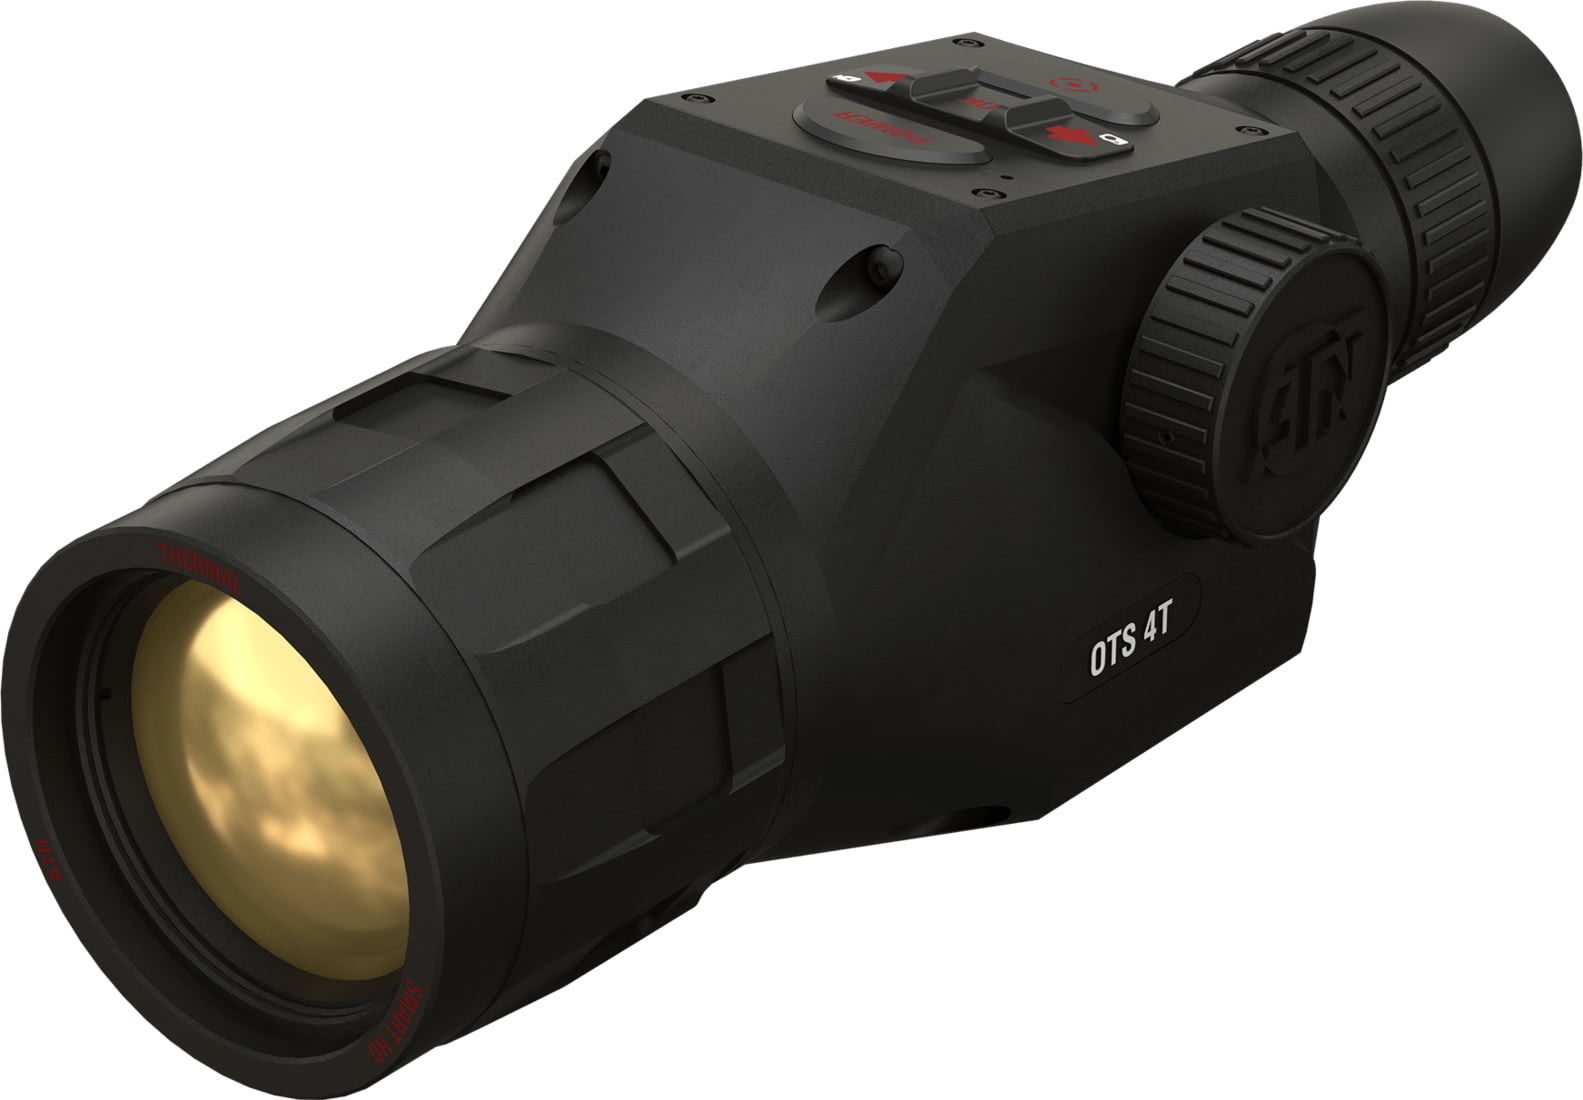 ATN OTS 4T, 2.5-25x, 640x480, Thermal Viewer w/ Full HD Video rec, WiFi, Smooth zoom, iOS/Android Controlling App, Black, TIMNO4643A